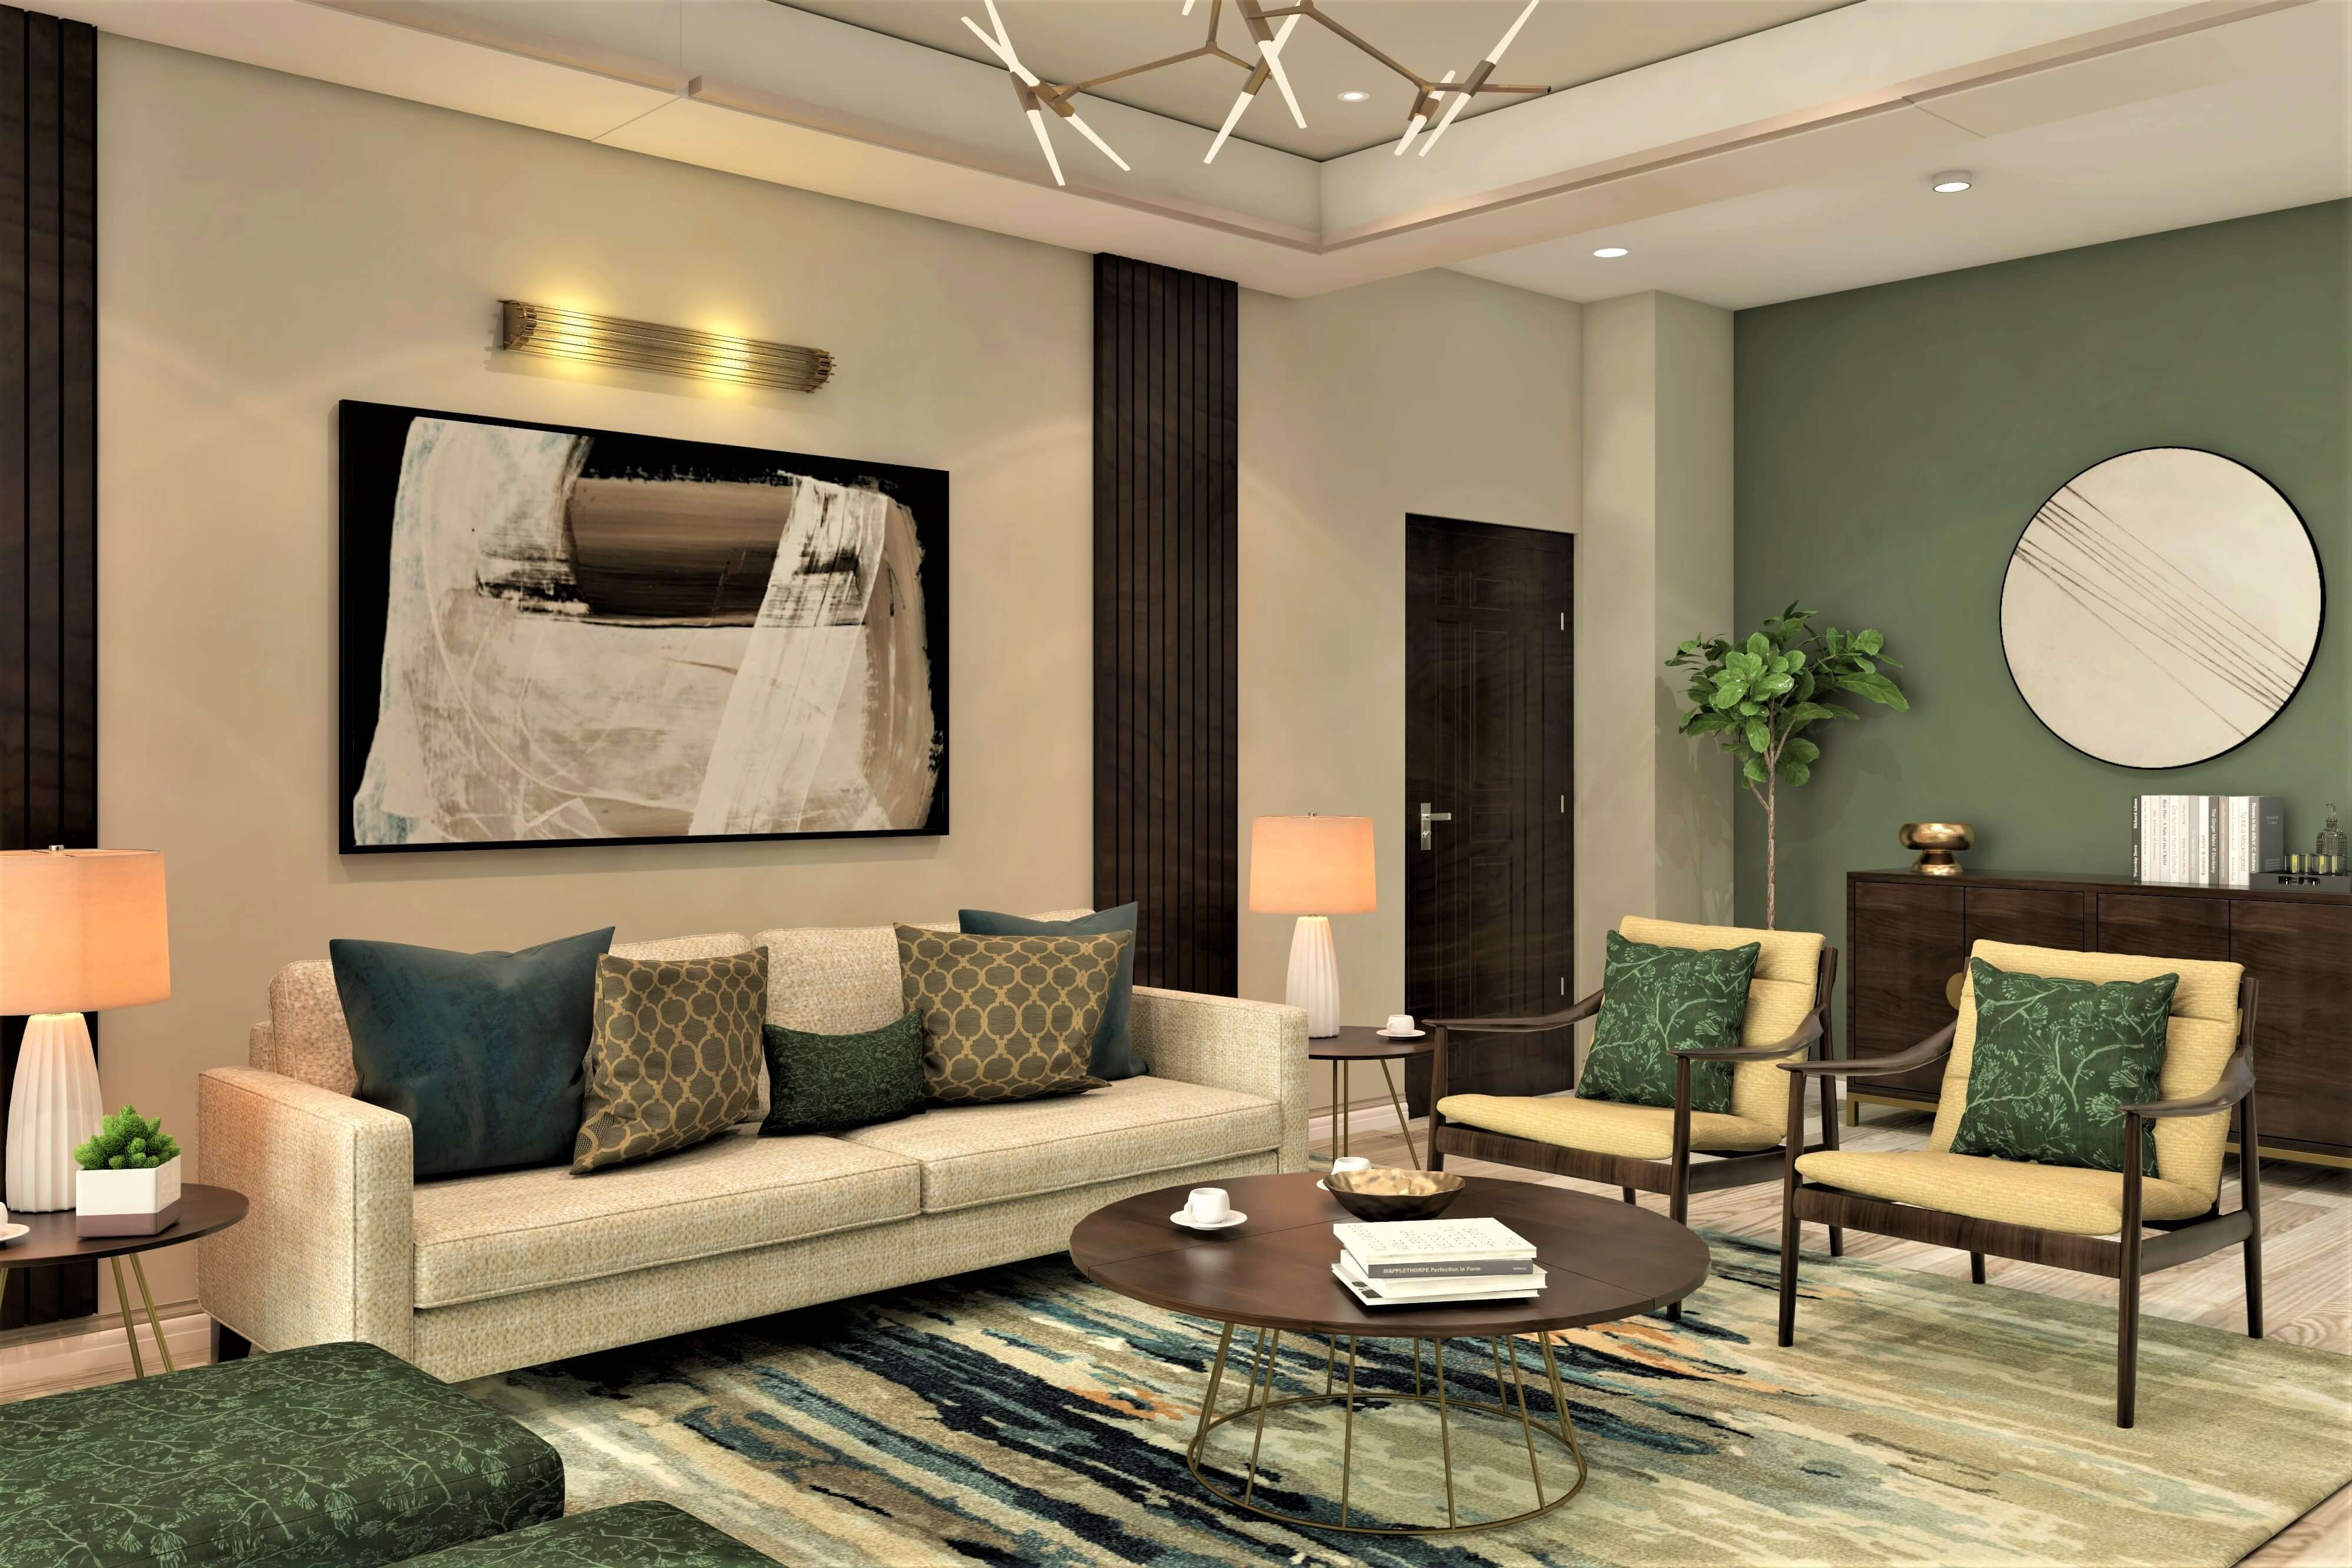 Abstract & contemporary living room design  for your space- Beautiful Homes